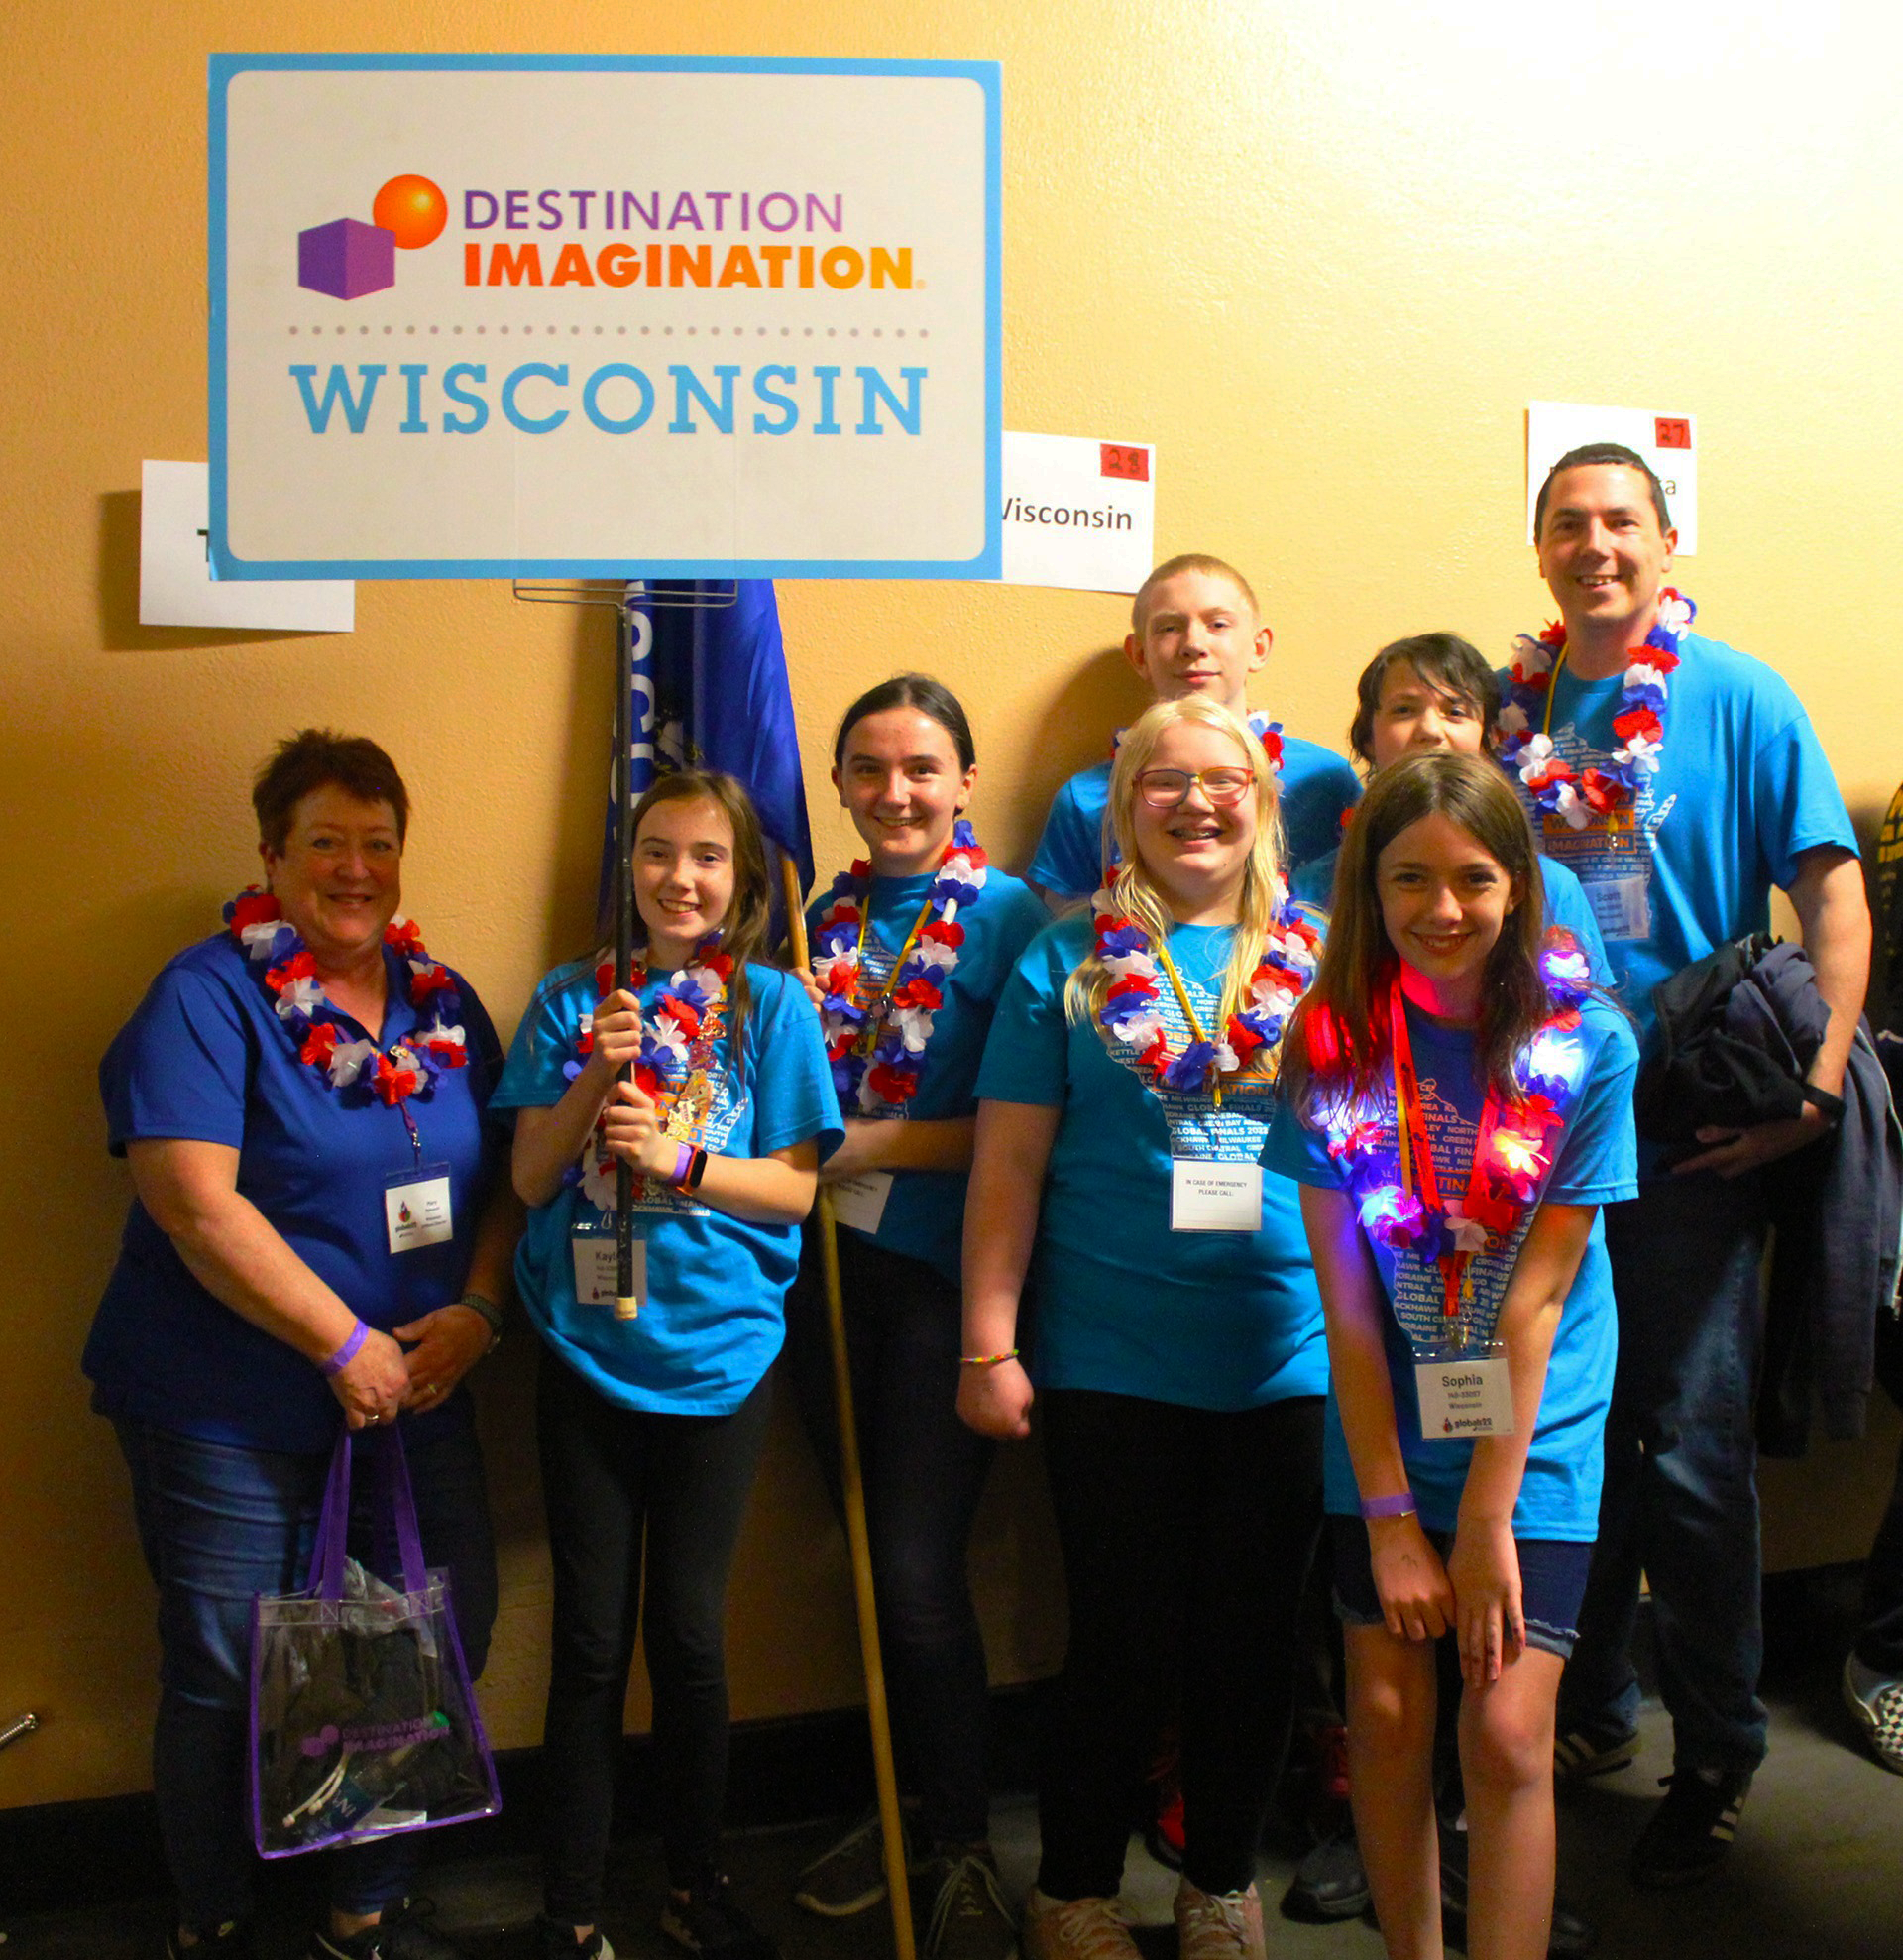 Wisconsin DI Global Finals Welcome Ceremony